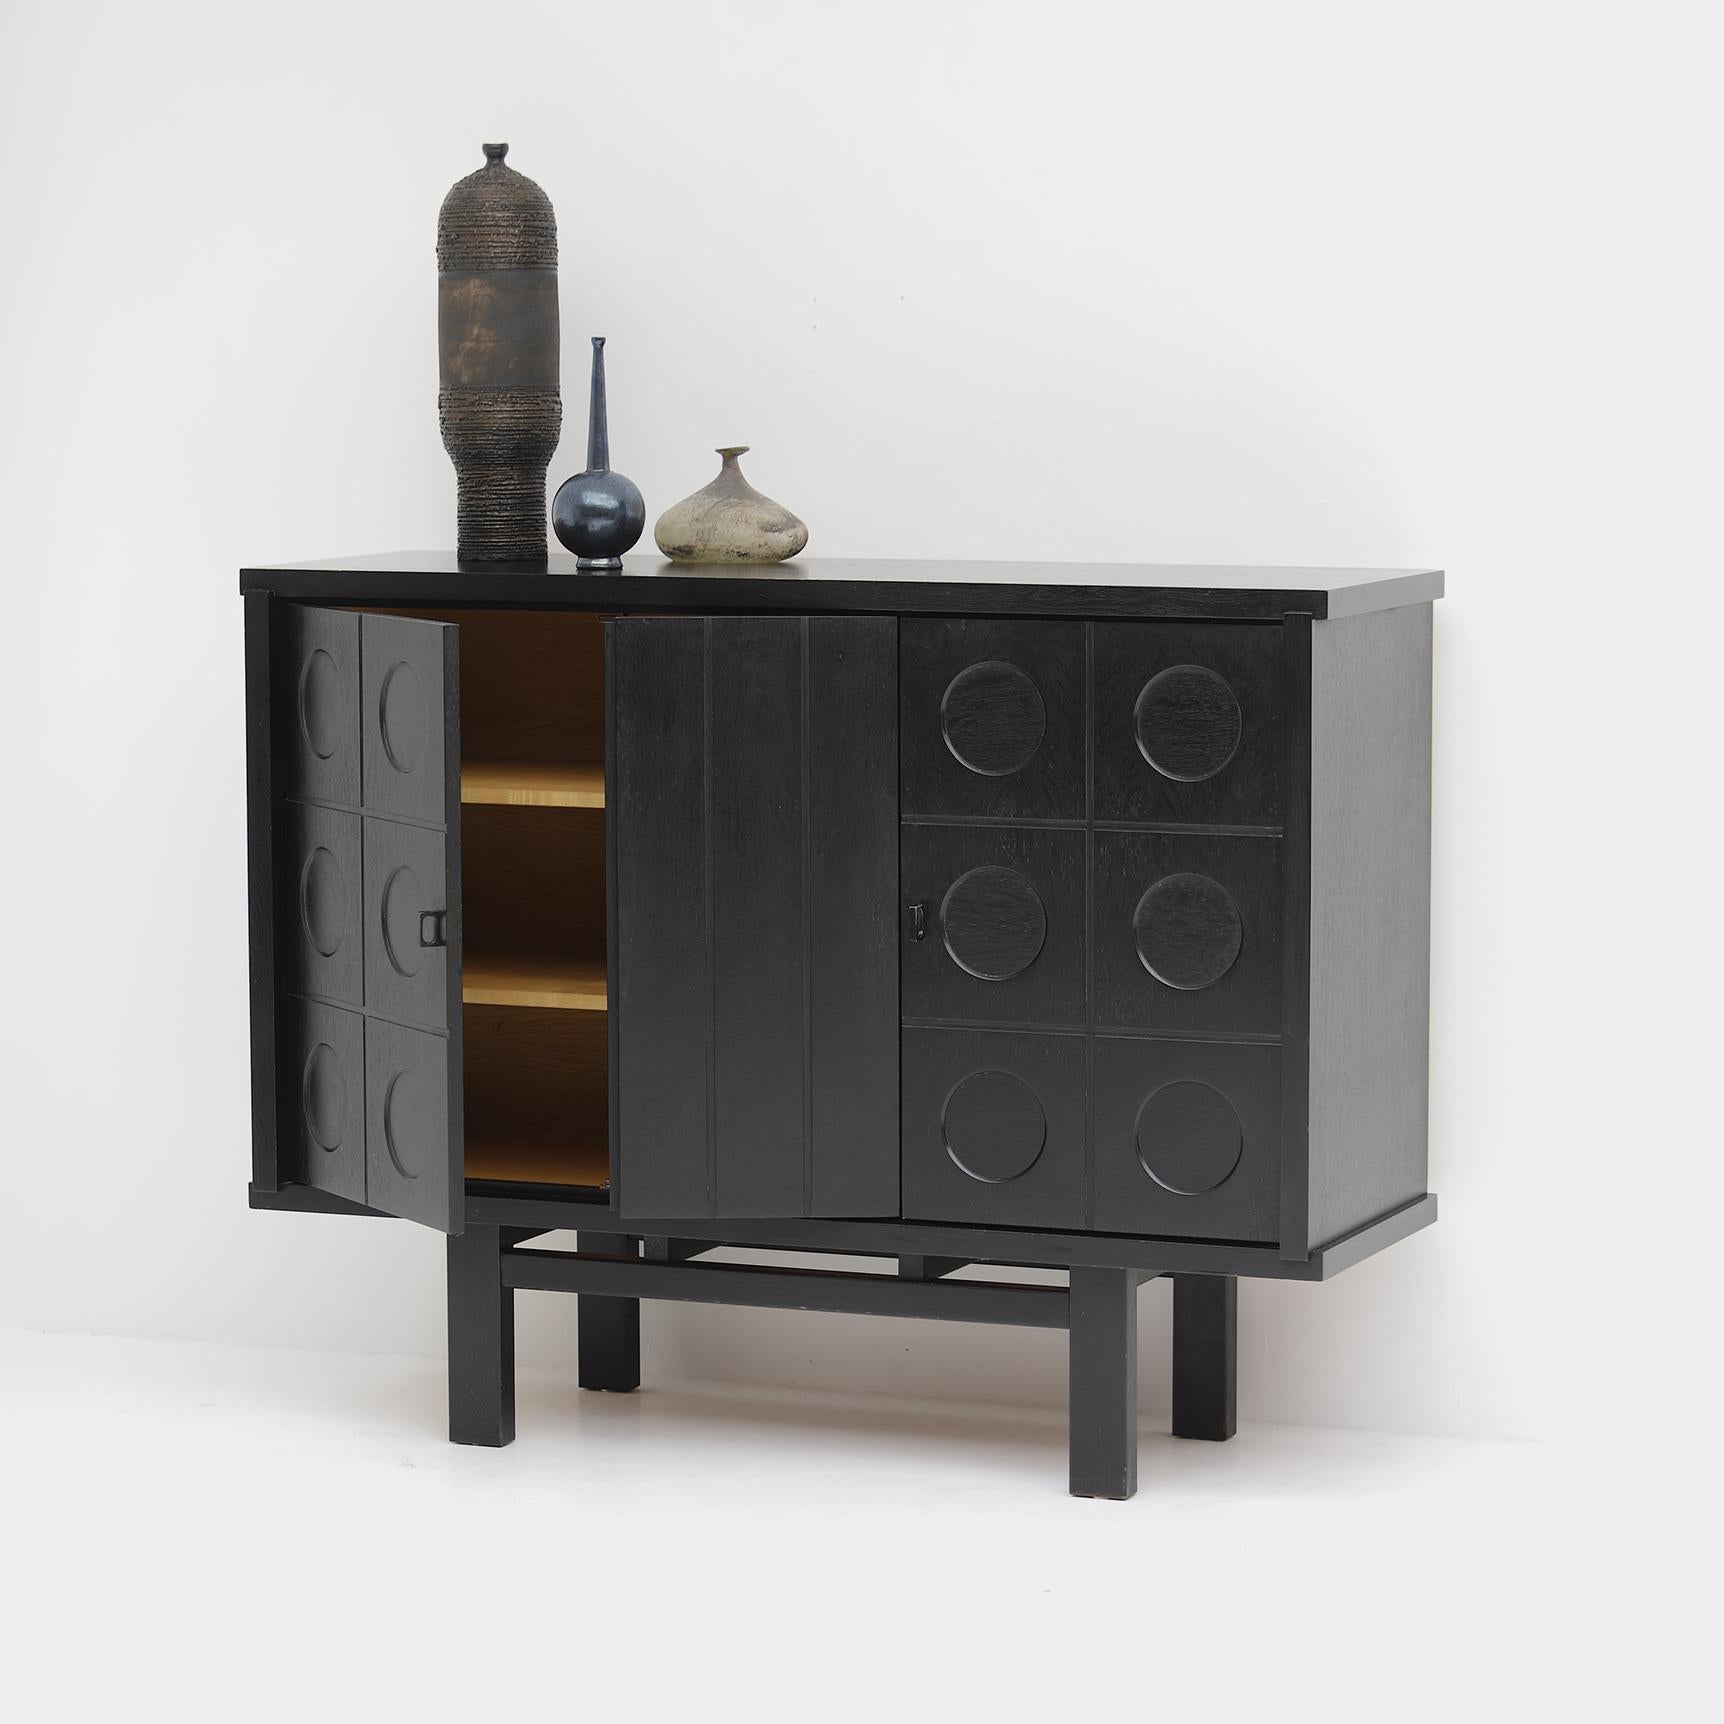 A timeless piece of brutalist craftsmanship from the 1970s, manufactured in Belgium. The cabinet is made out of a black ebonized oak and had metal doorhandles. It features two graphic patterned doors that provides plenty of storage which makes it